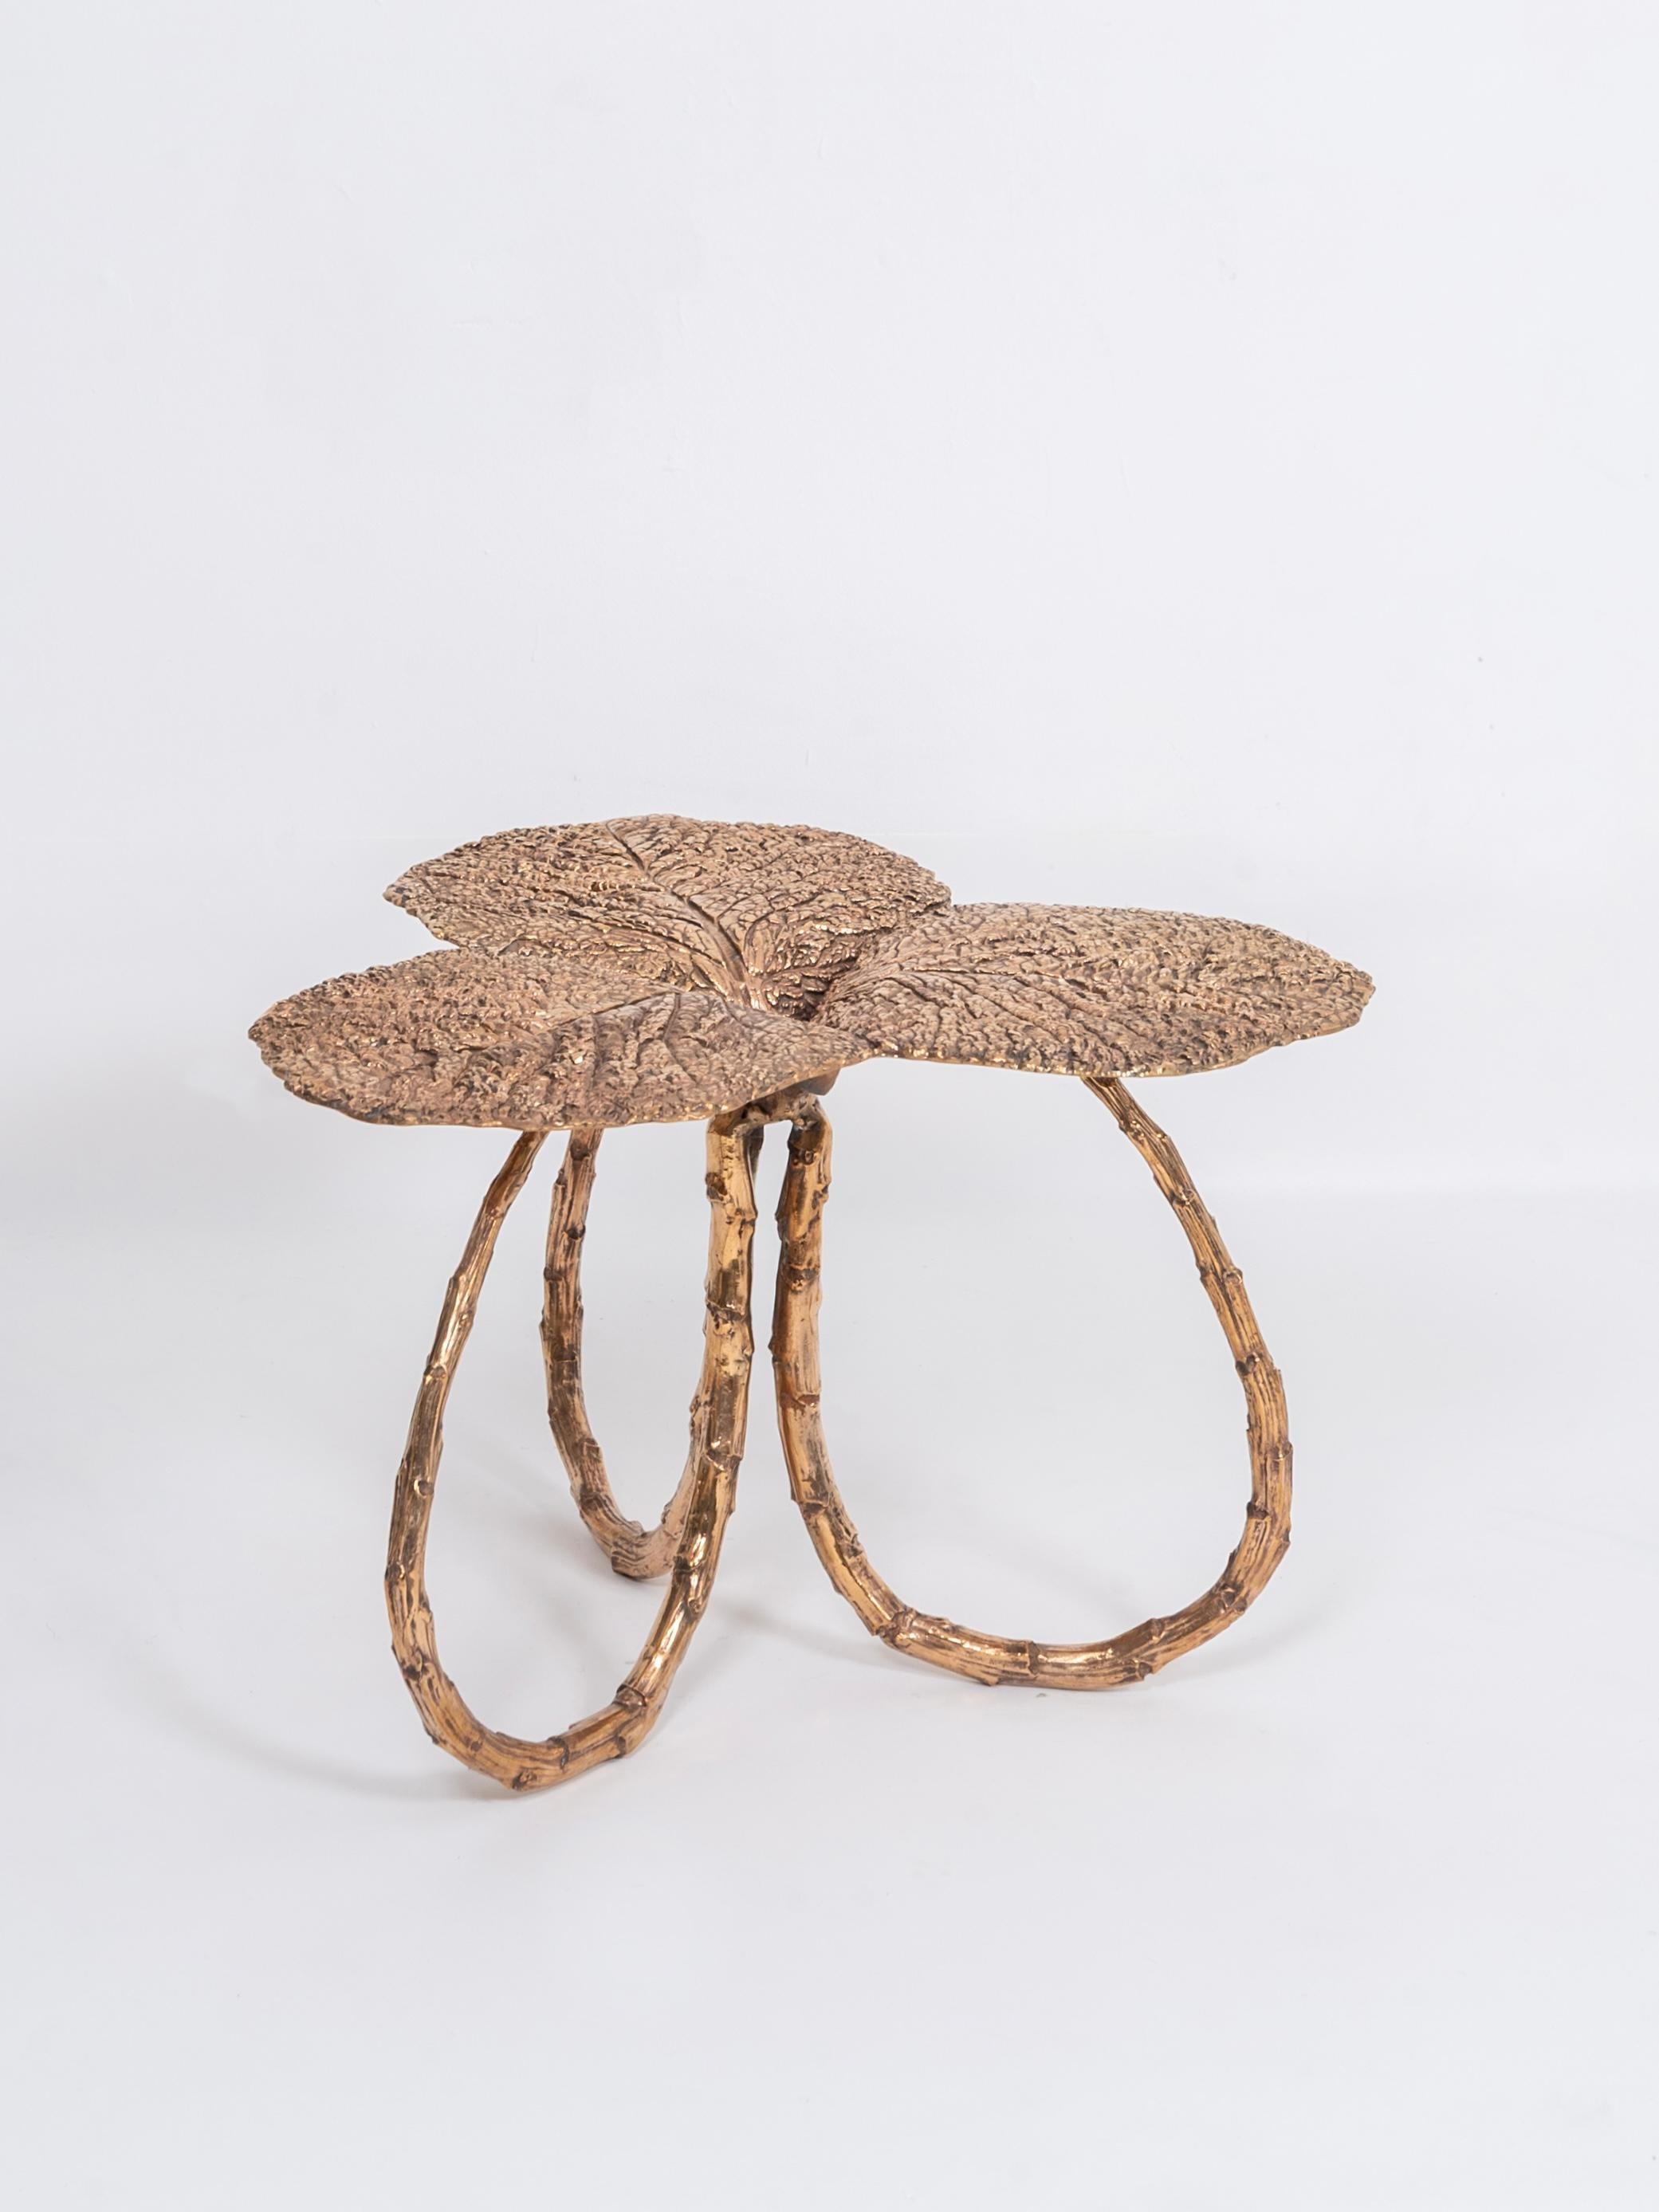 Follia Clover Coffee Table by Clotilde Ancarani 
Material: Bronze, gold patina
Dimensions; H 45 x Ø 65 cm
Year: 2020
Type: Limited edition of 8 + 4 AP
Available in green, brown, and gold patina finishing, each of the finishes is an edition of 8